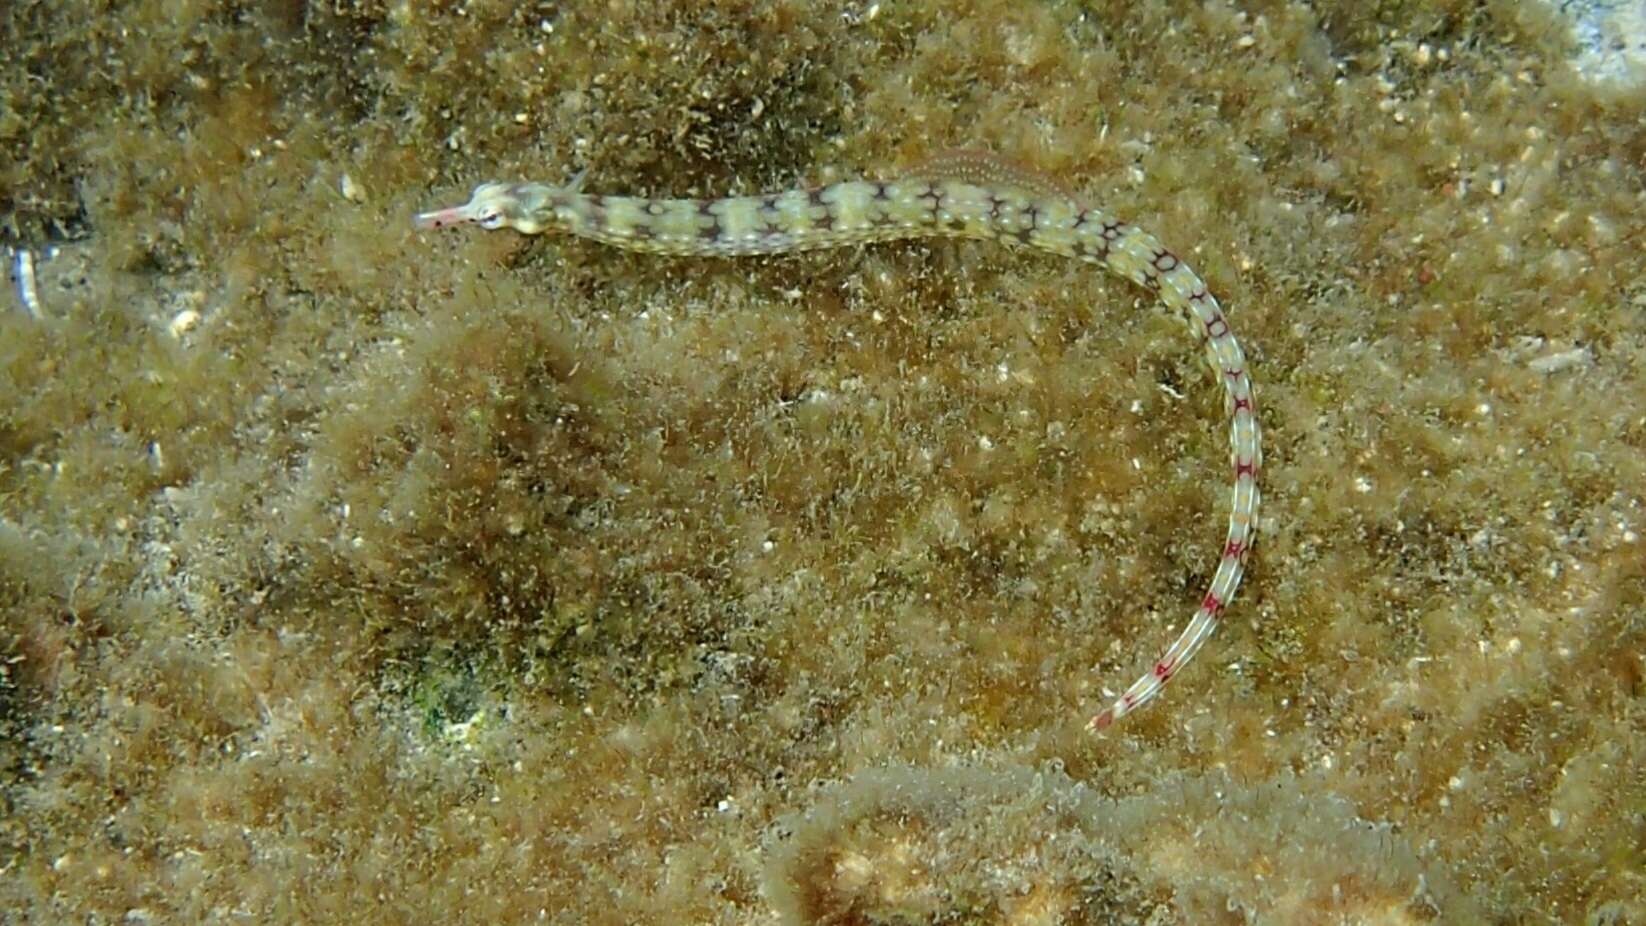 Image of Network pipefish